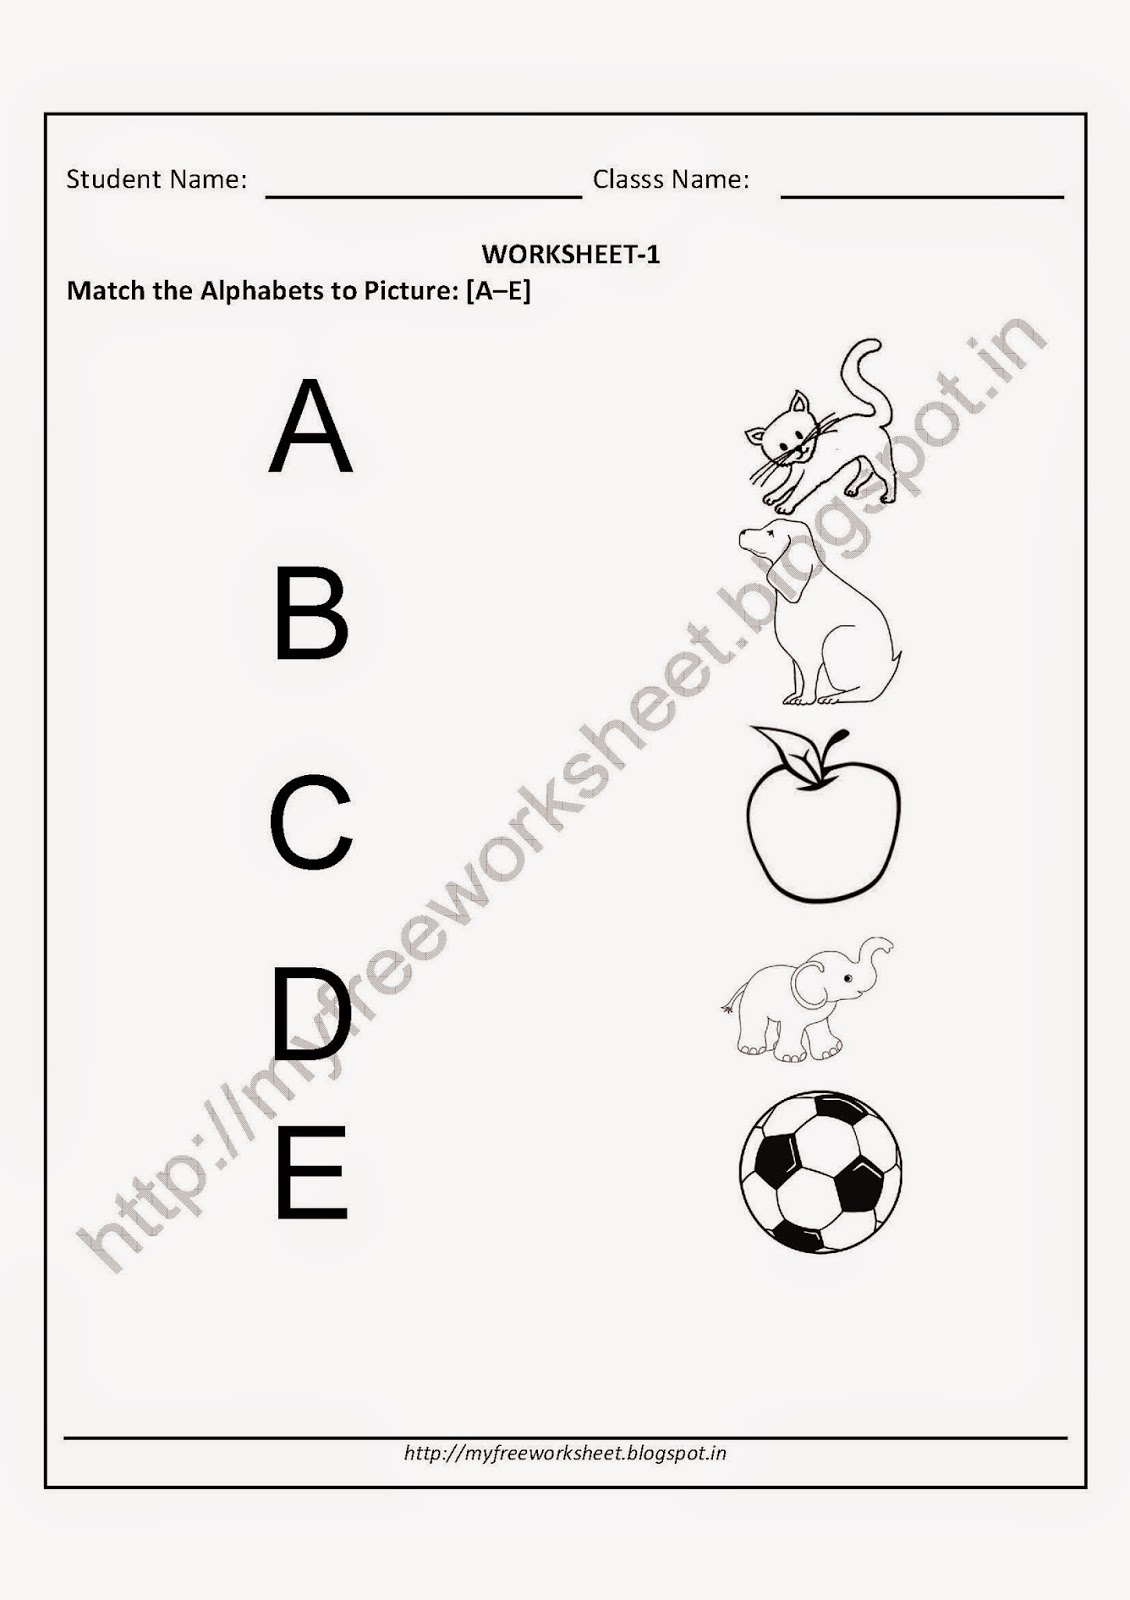 match-the-alphabet-to-picture-worksheets-for-nursery-children-free-download